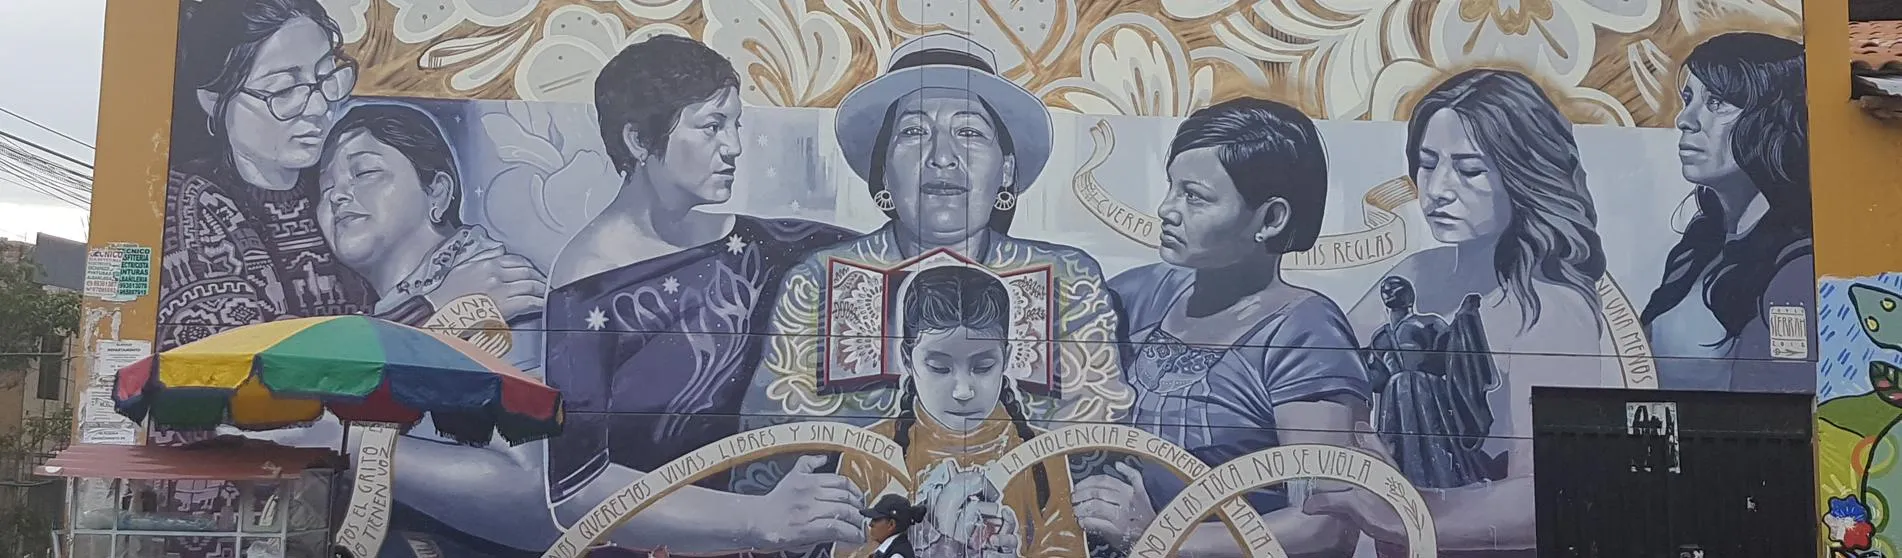 Mural calling for an end to gender-based violence in Ayacucho, Peru